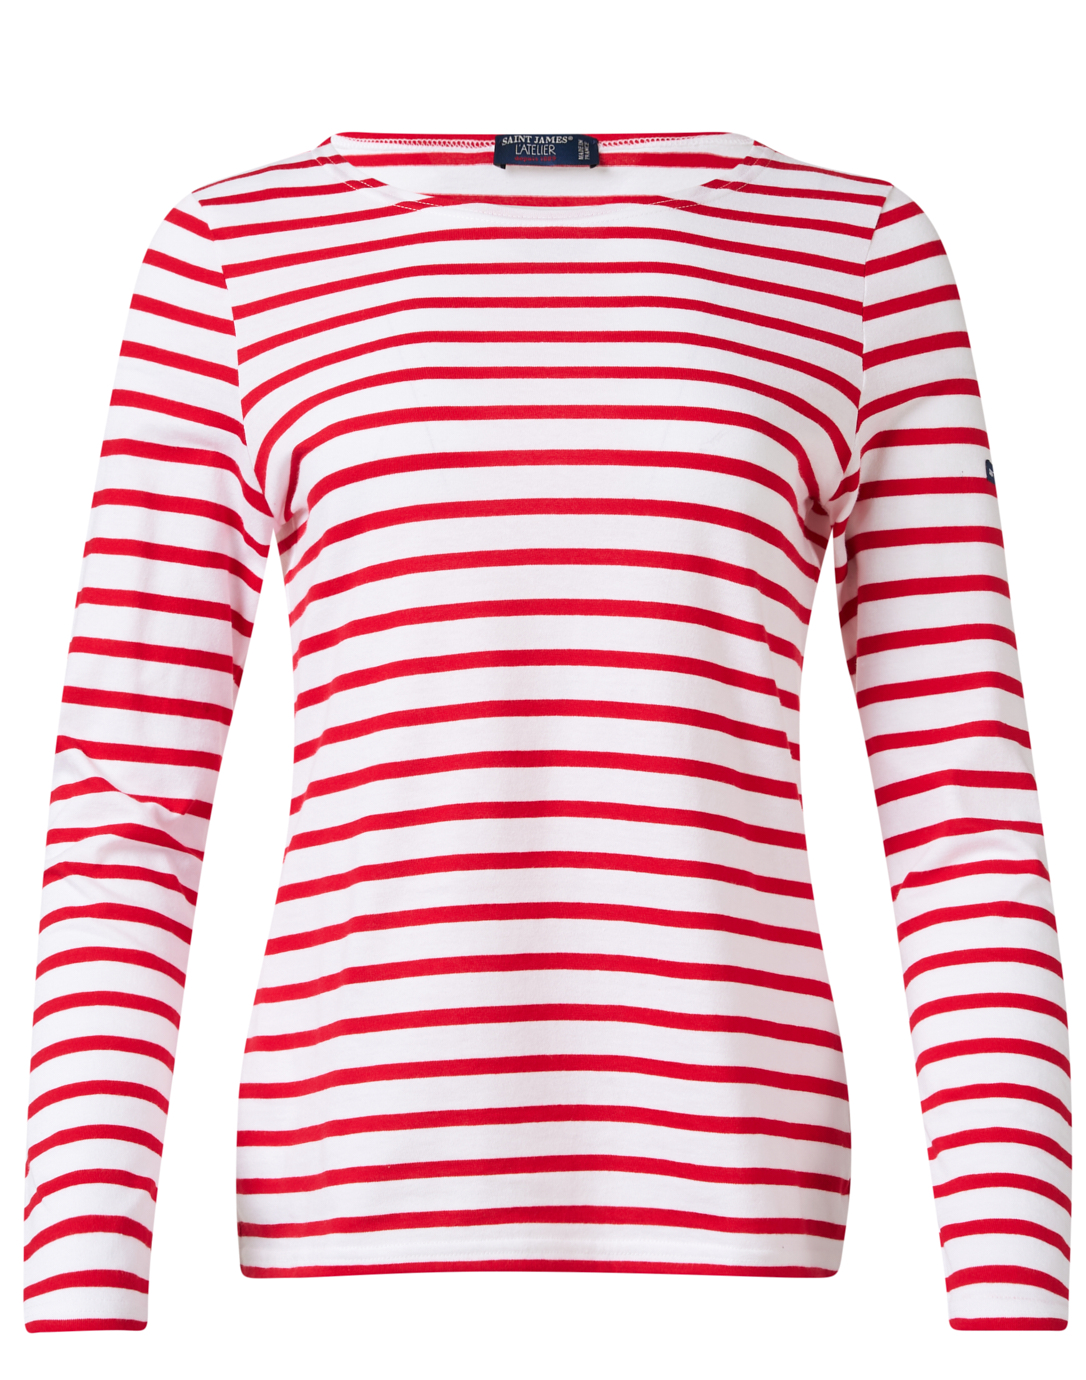 Minquidame White and Red Striped Cotton Top | Saint James